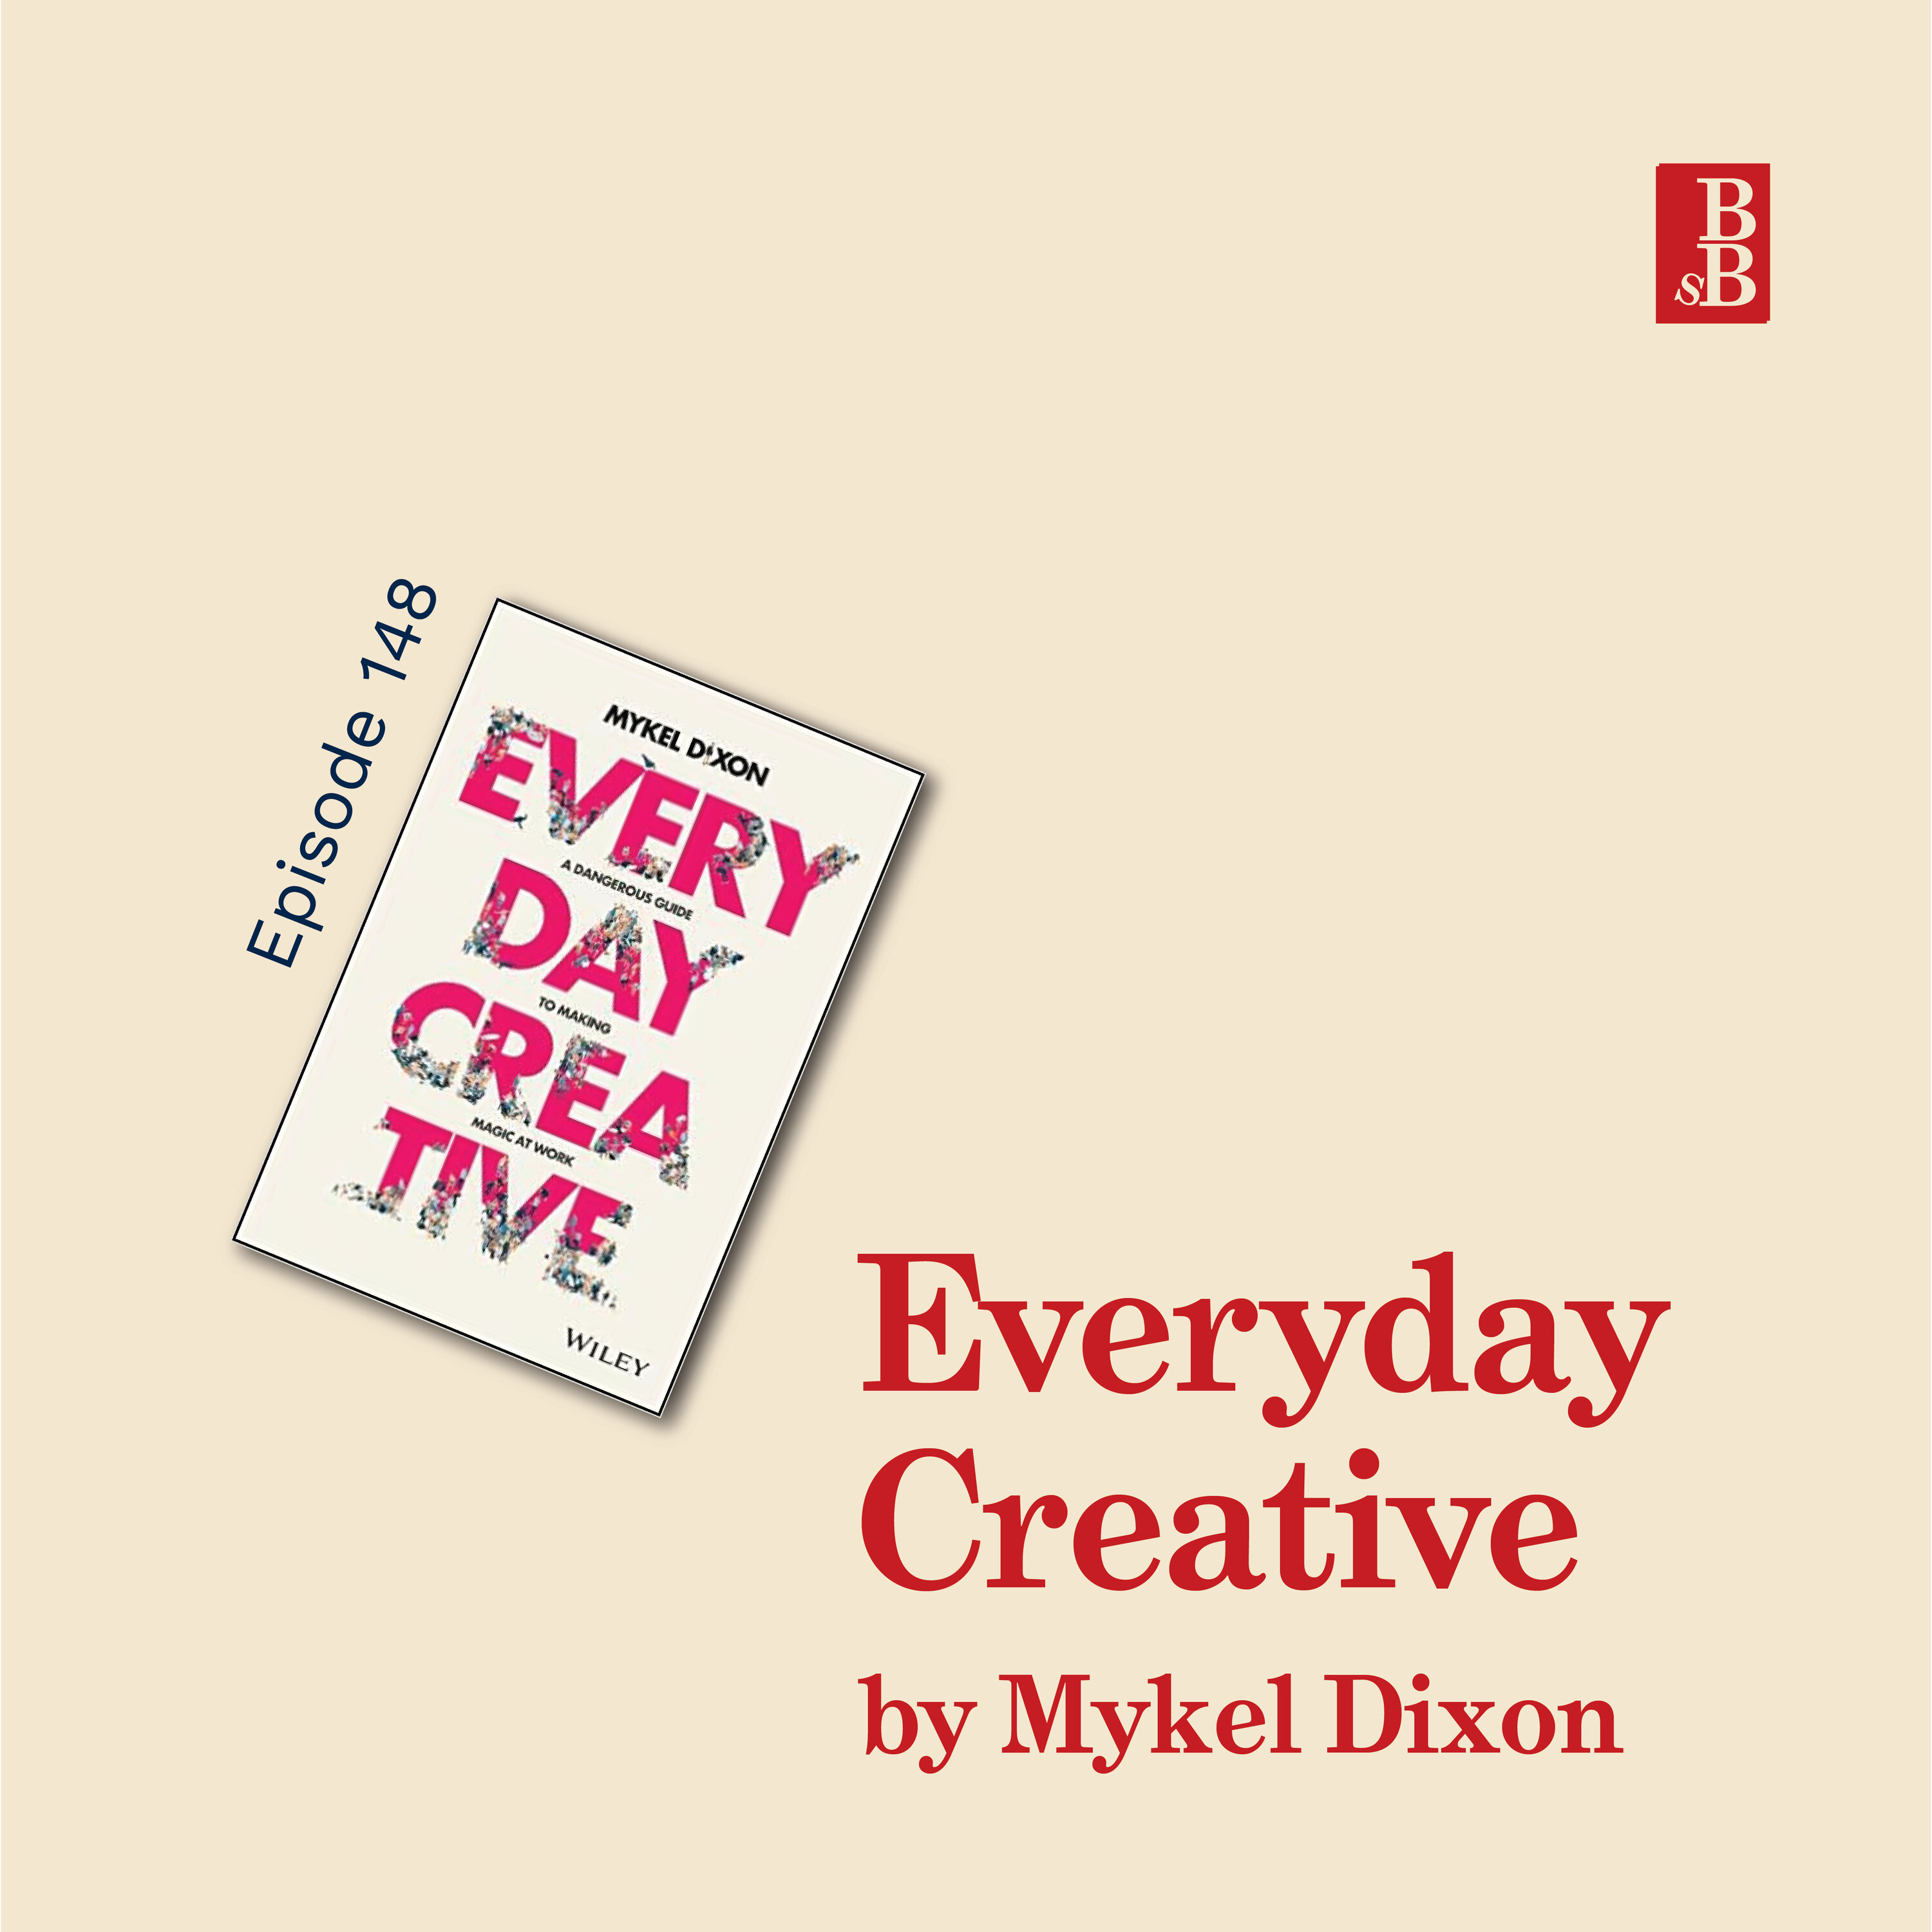 Everyday Creative by Mykel Dixon: how to live courageously with creativity Image